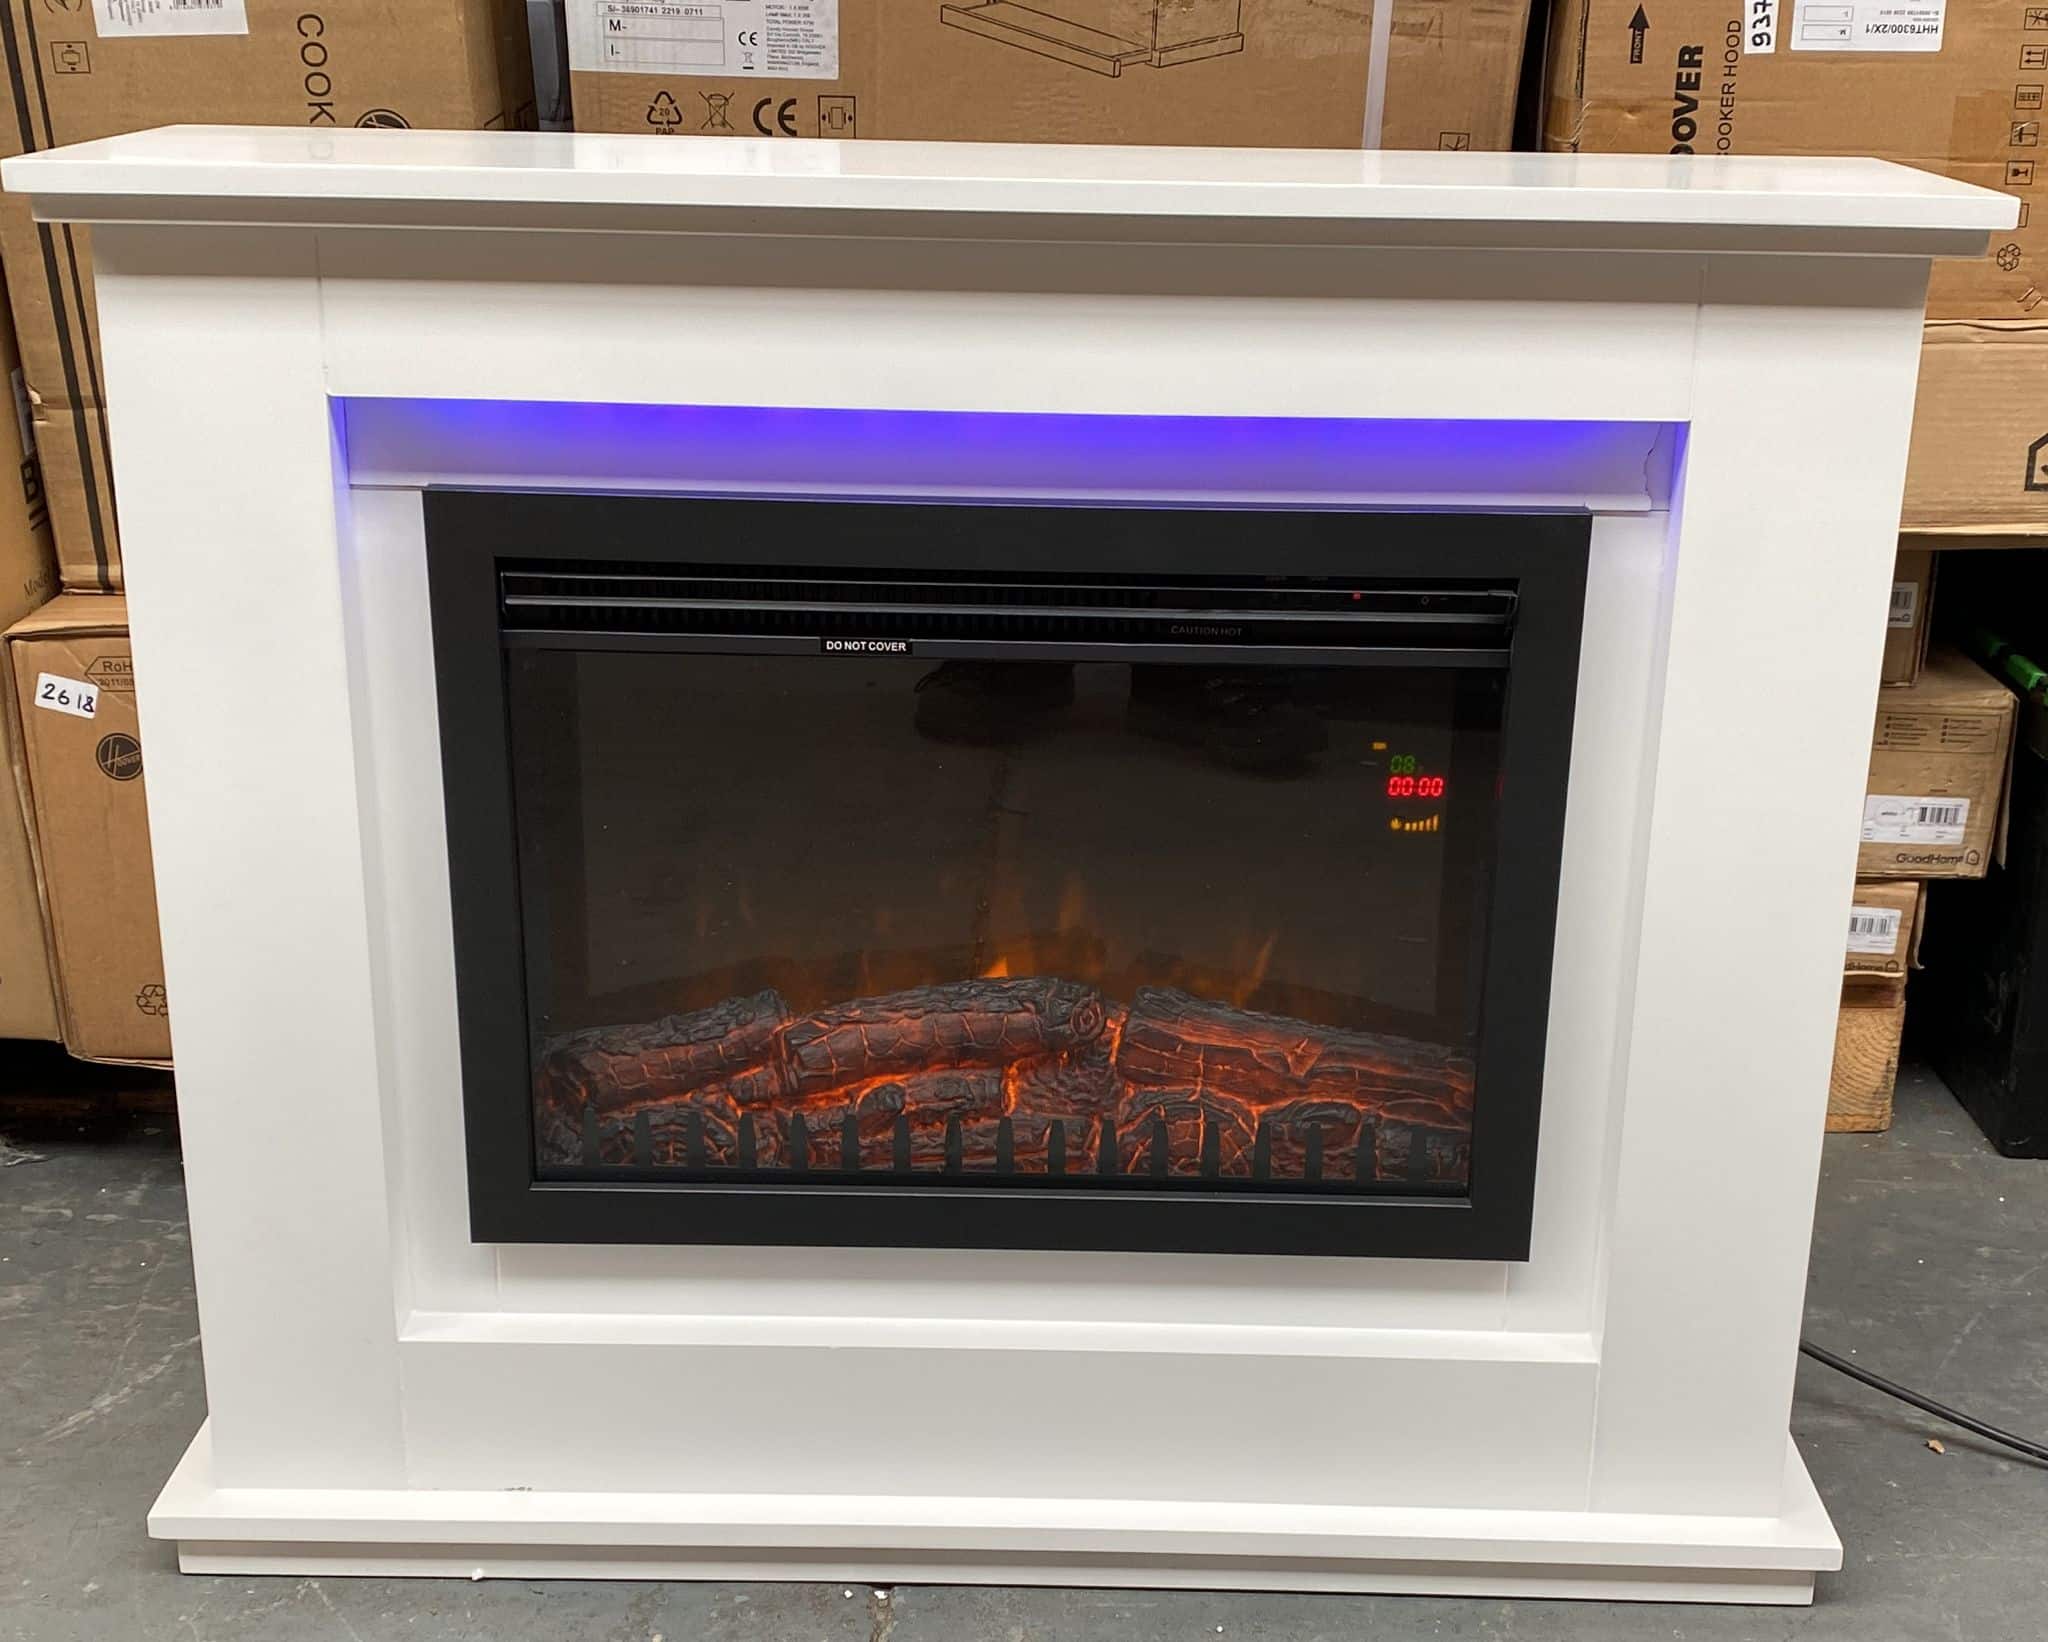 Focal Point Medford White Electric Fire suite X-Display 5276